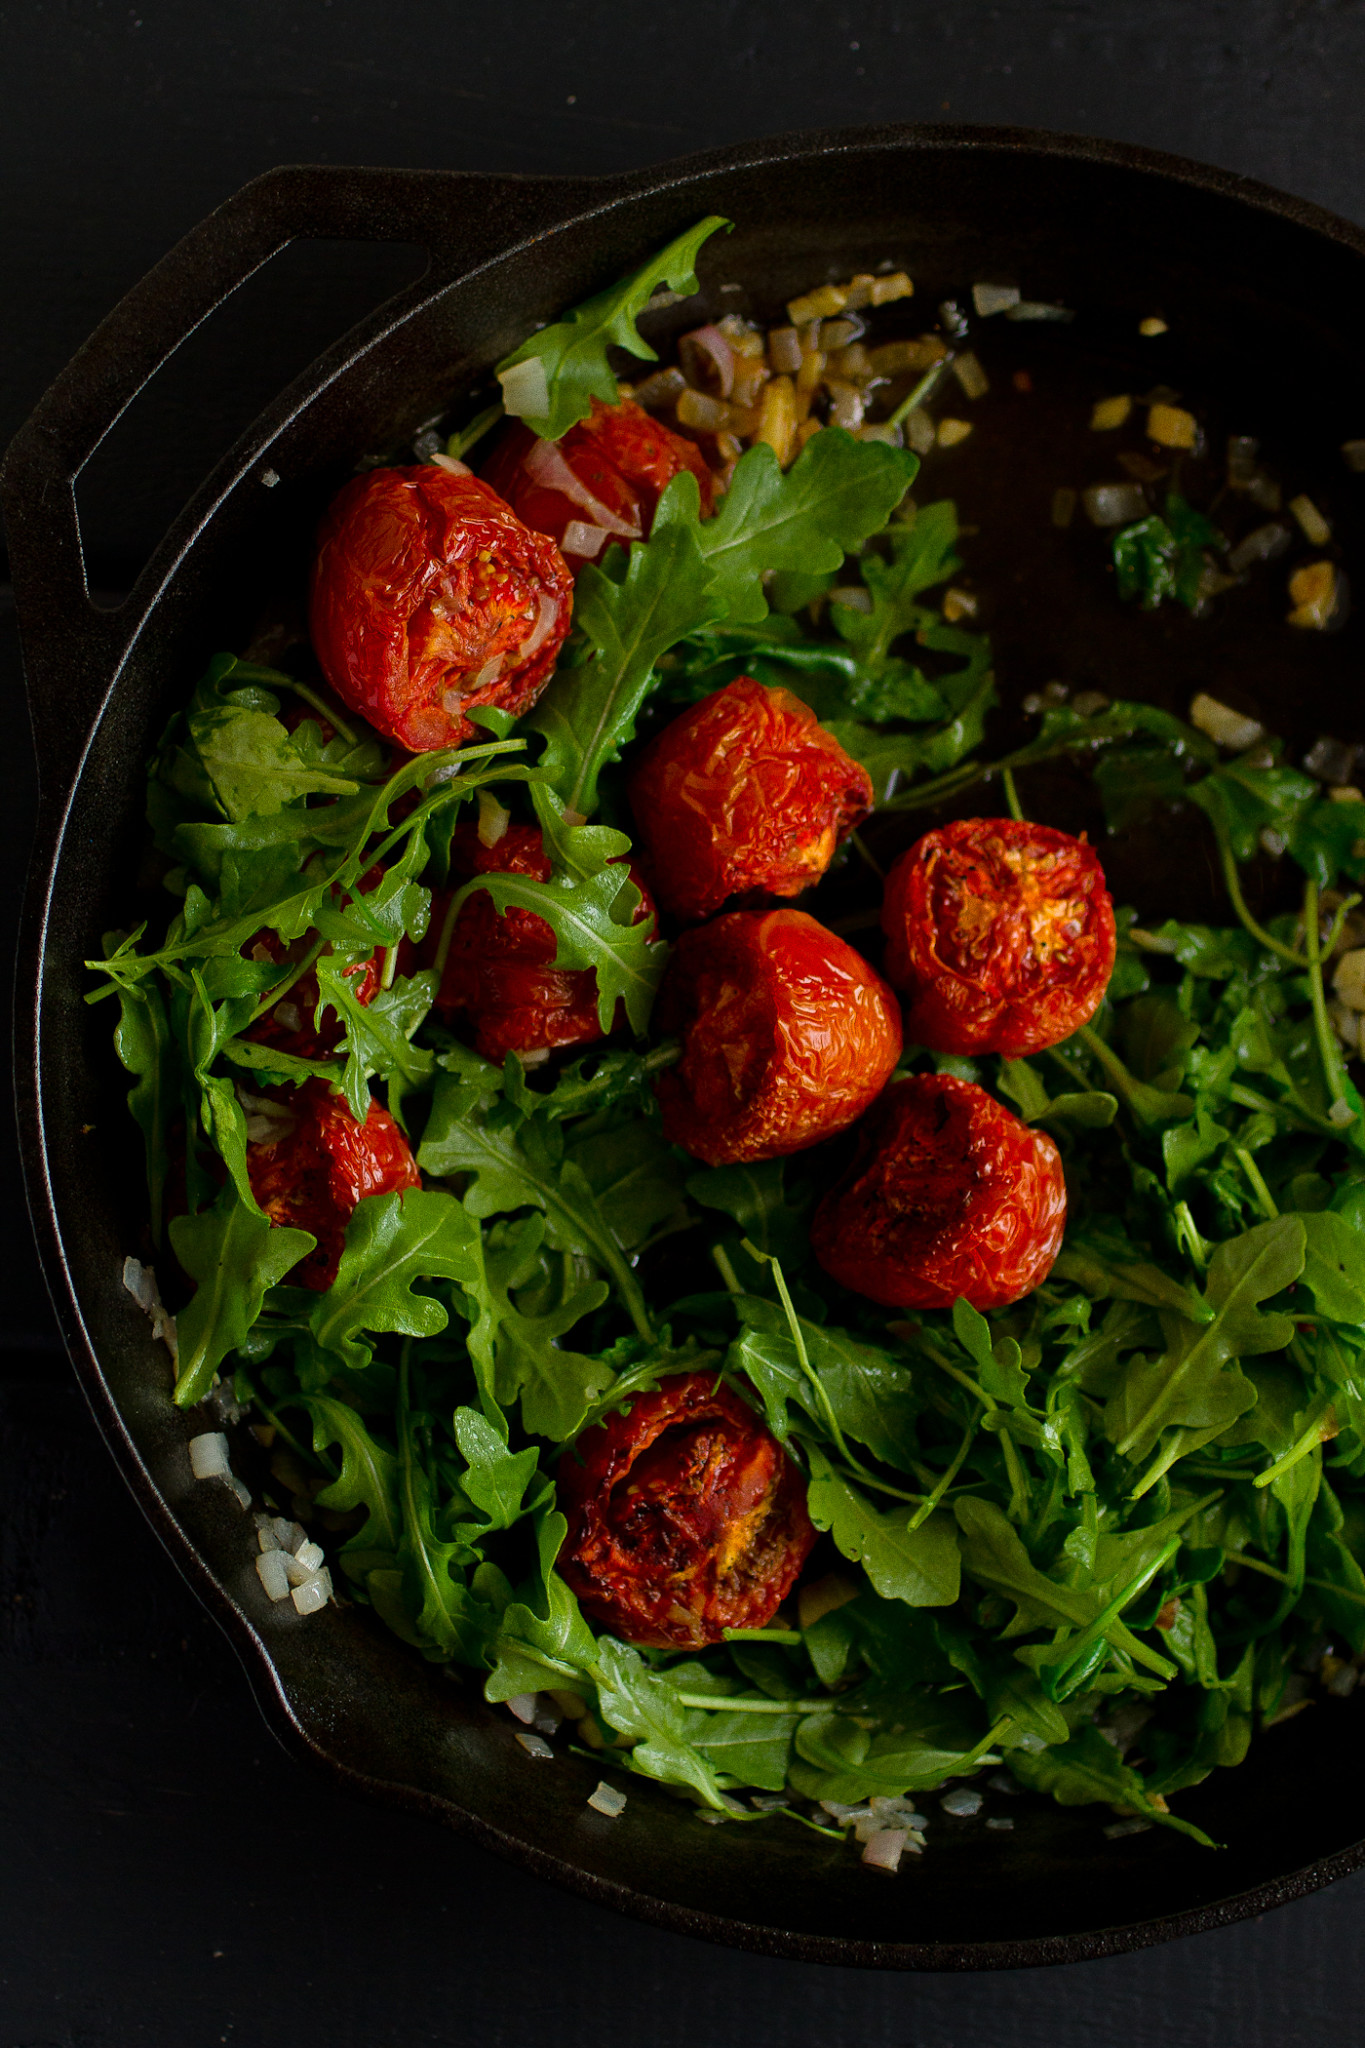 Cast iron skillet with roasted cherry tomatoes and arugula food photo